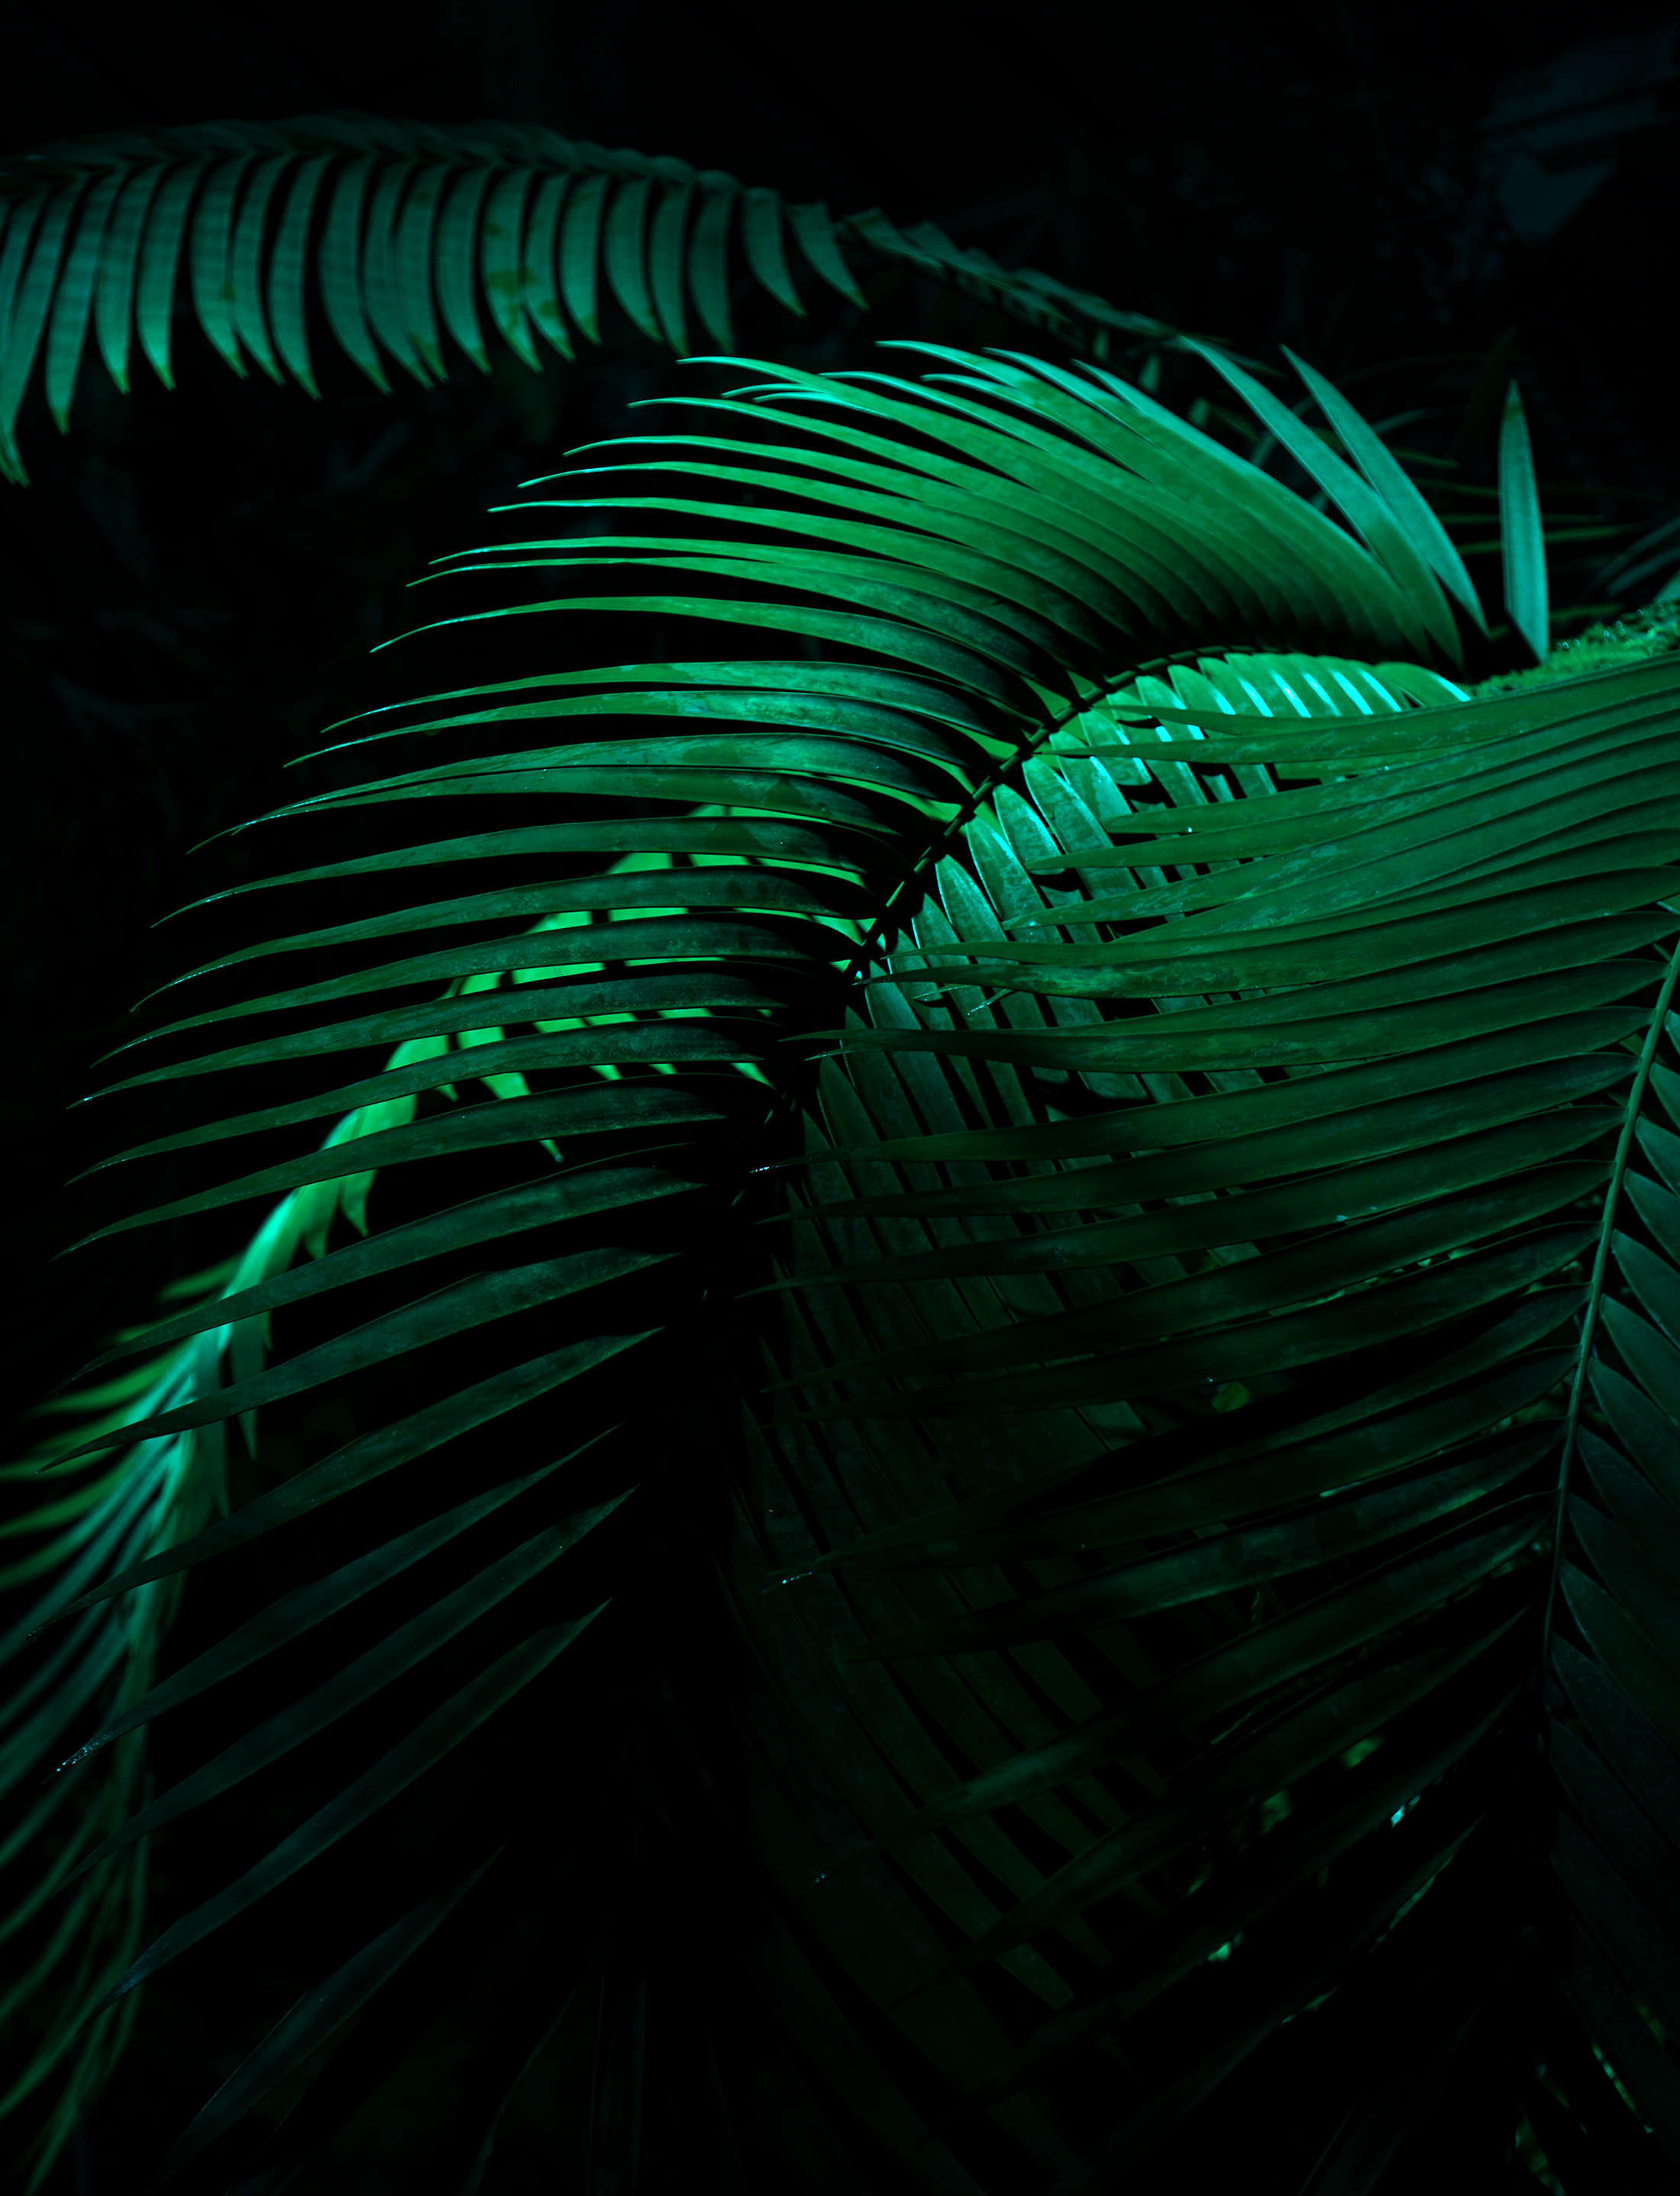 Fern fronds in the Garfield Park Conservatory at night, Chicago / Darker than Green